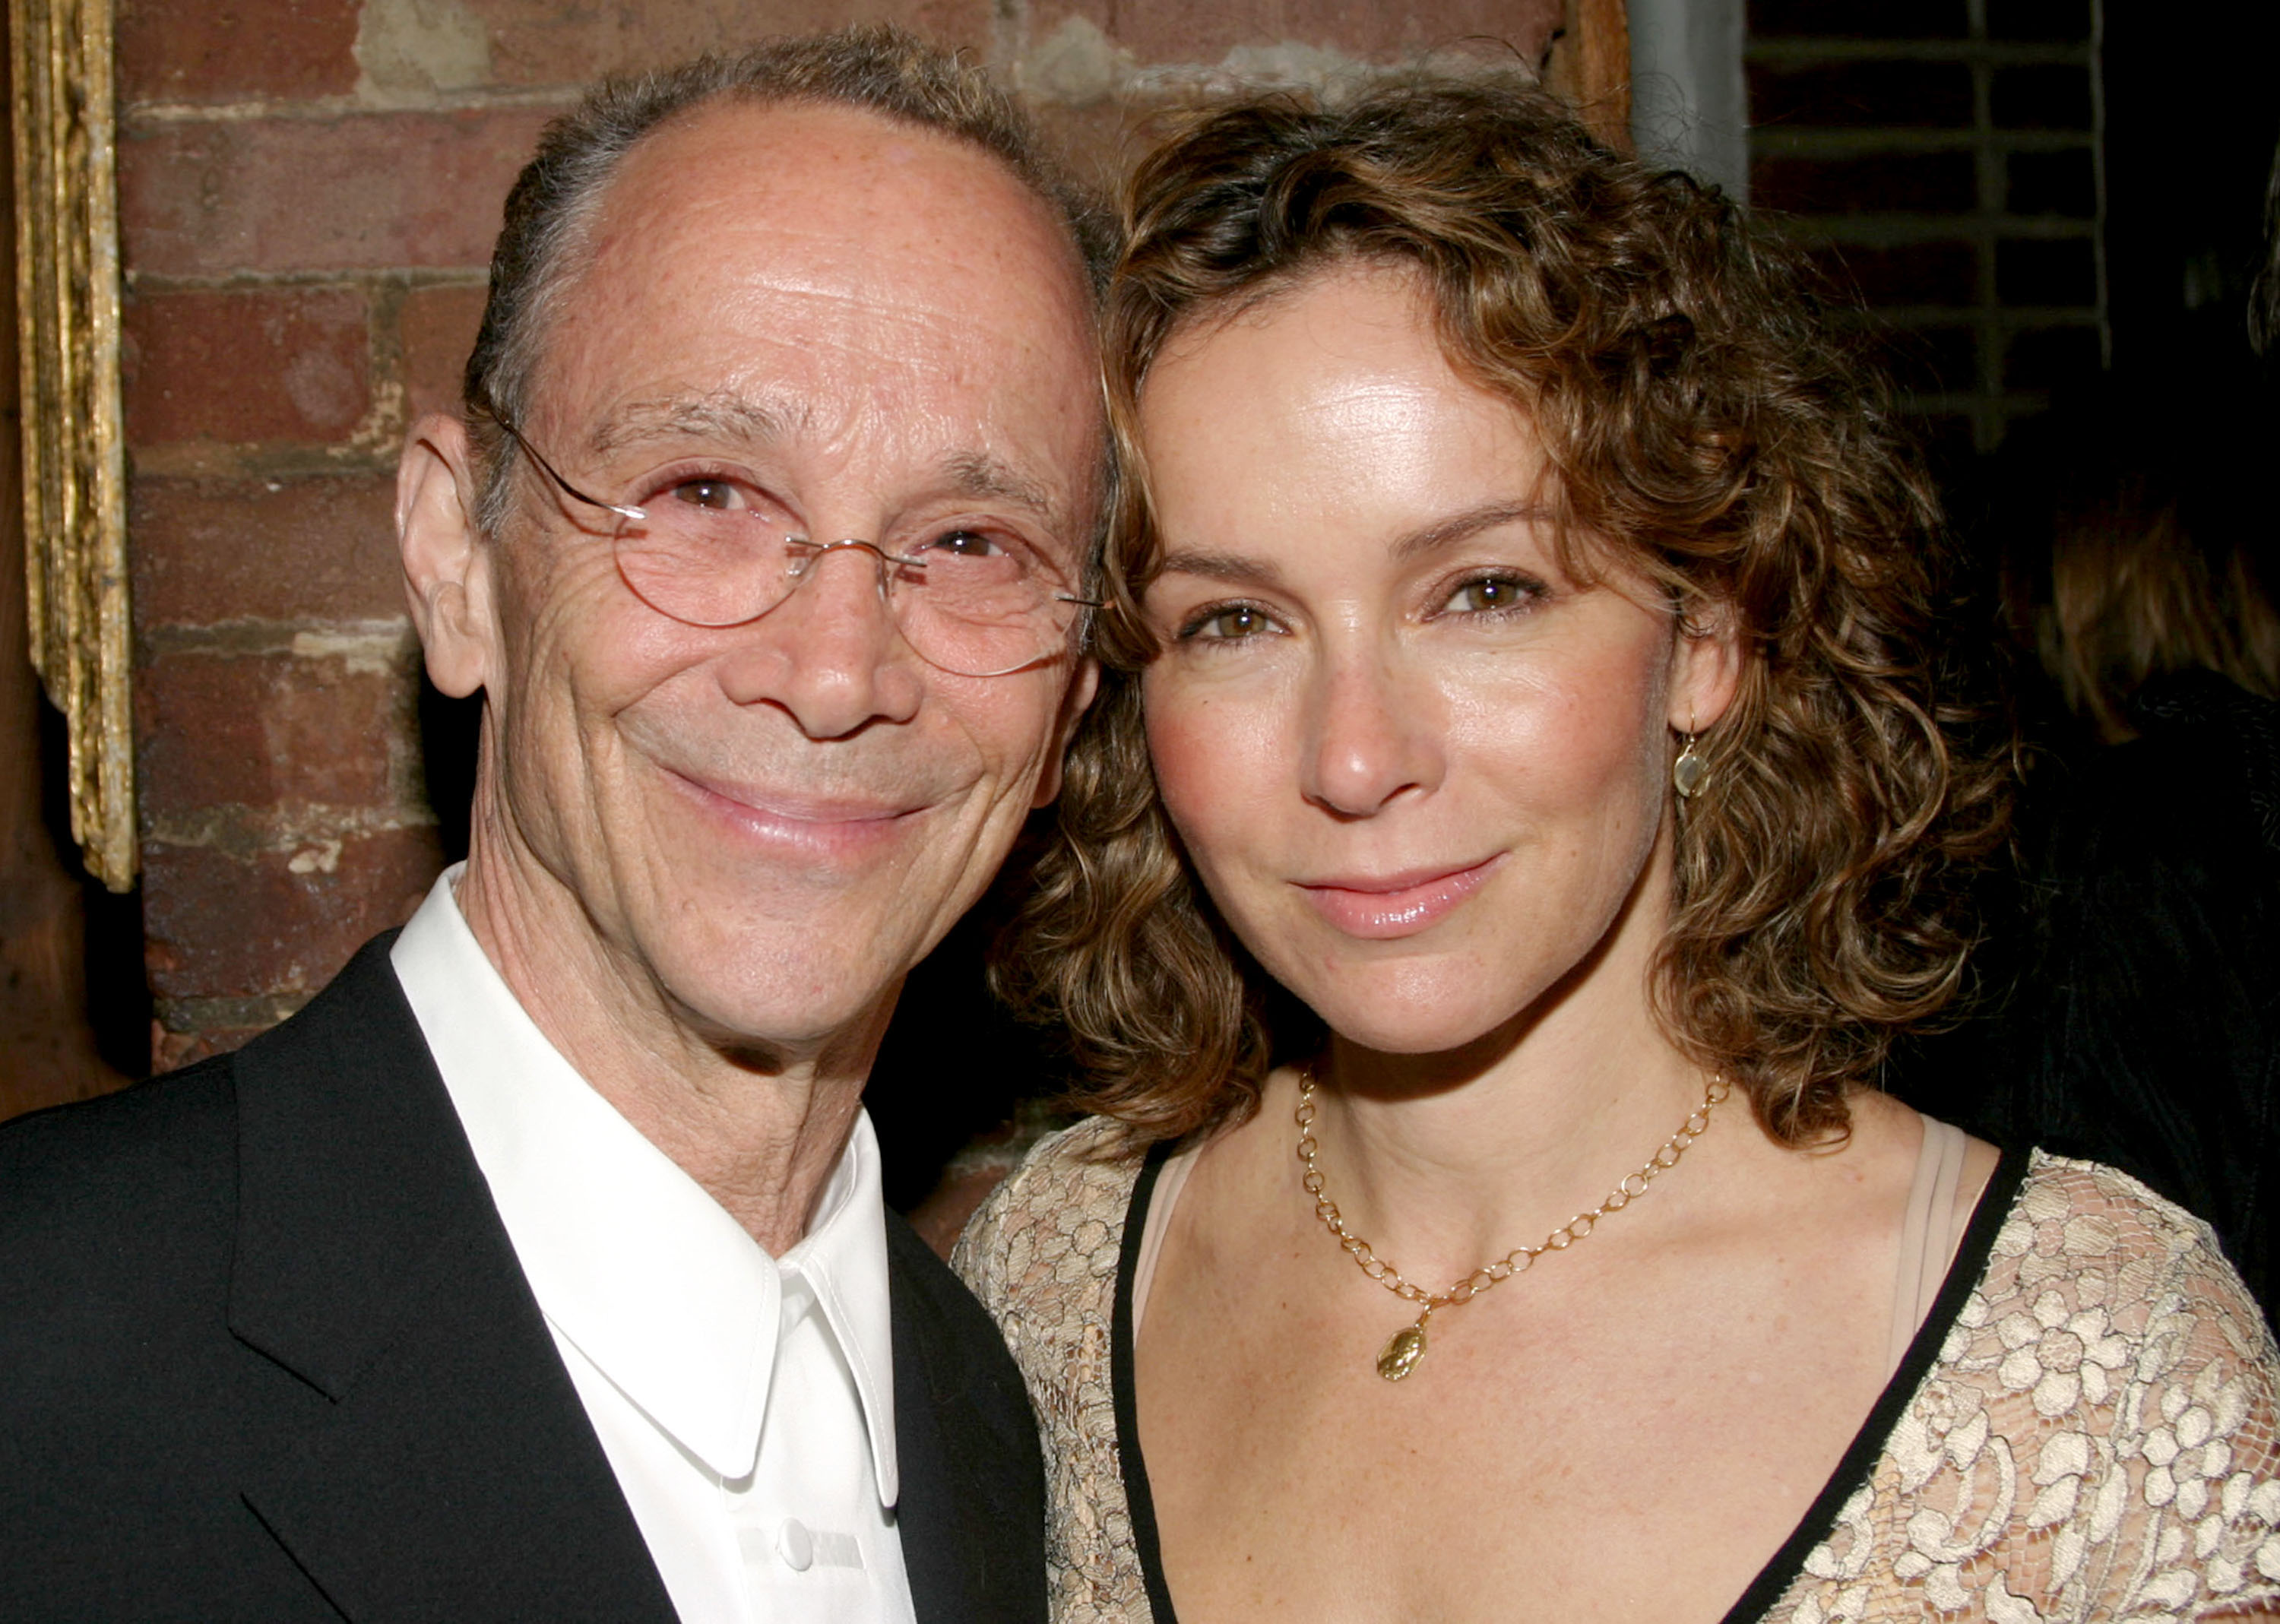 Joel and Jennifer Grey at the opening night of "Wicked" on Broadway in New York City, 2003 | Source: Getty Images